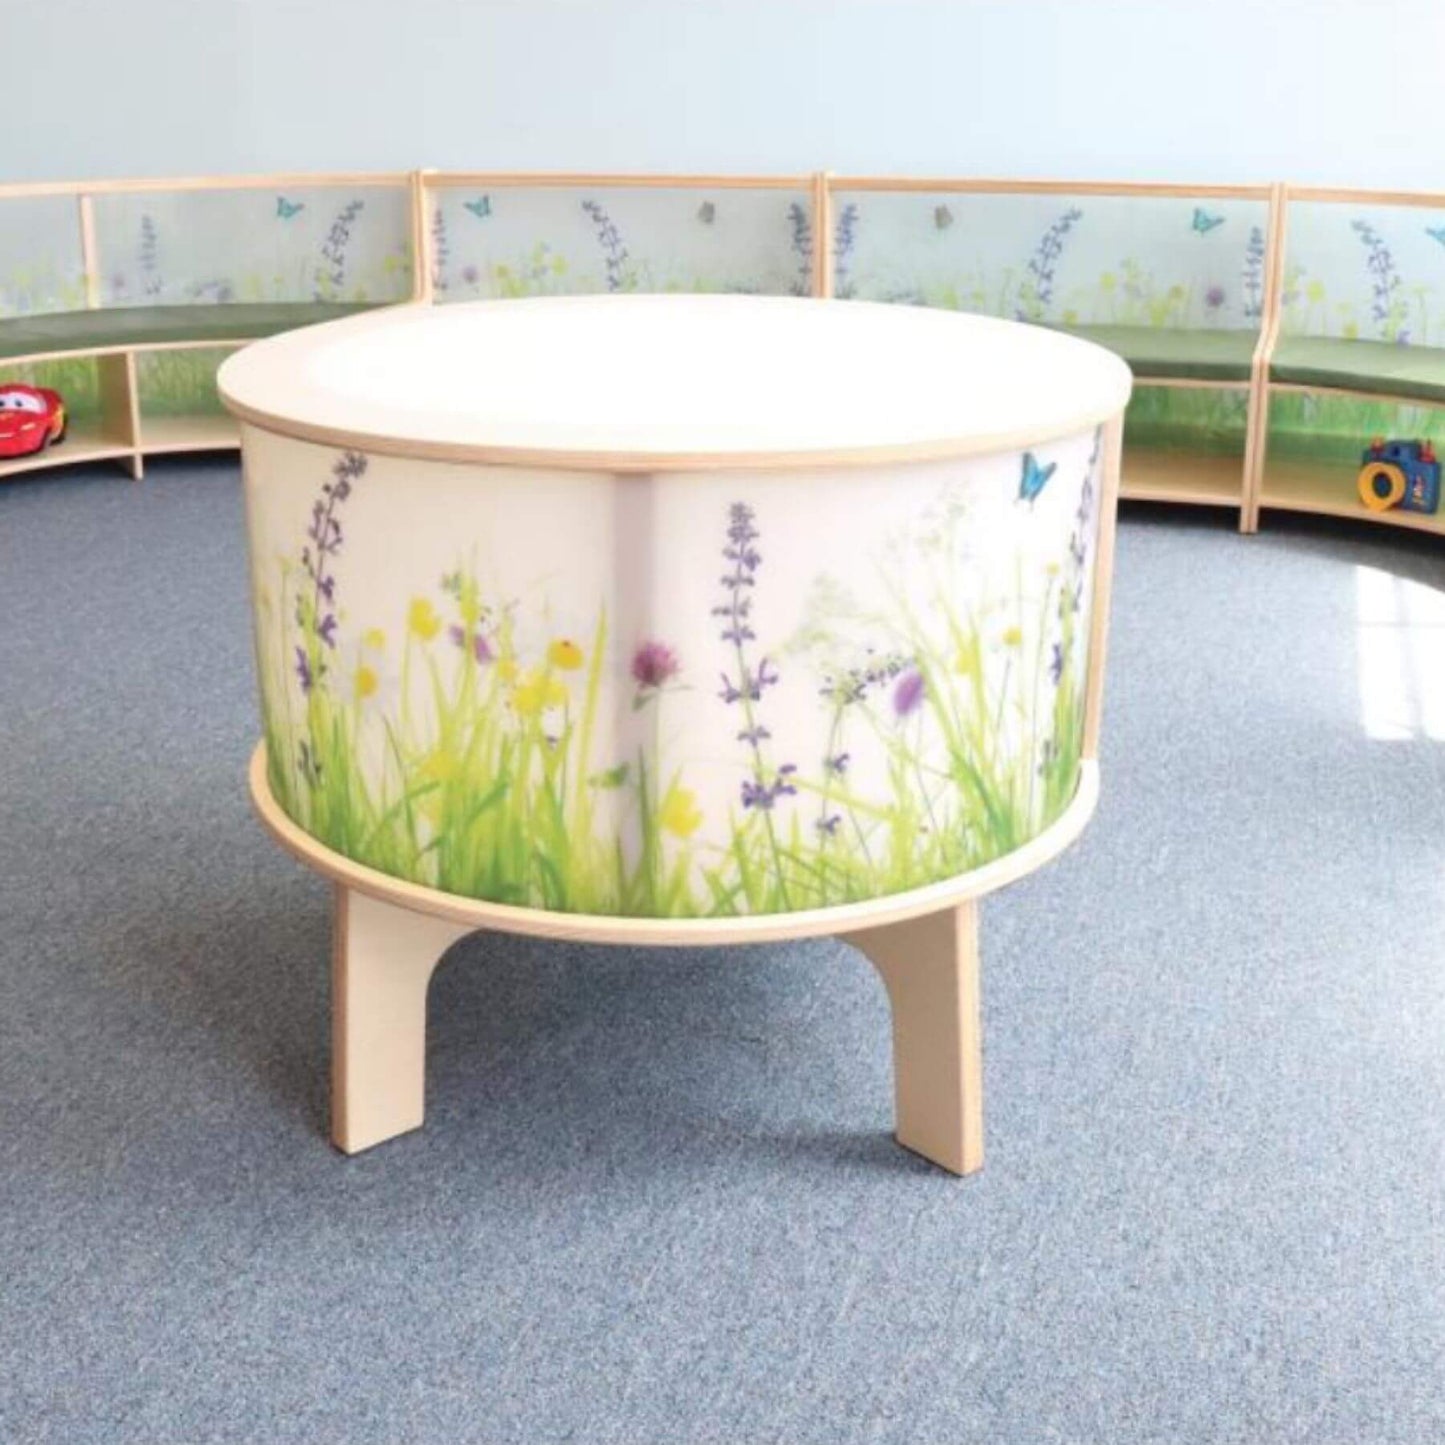 Whitney Brothers Nature View Radiant LED Light Table in Playroom